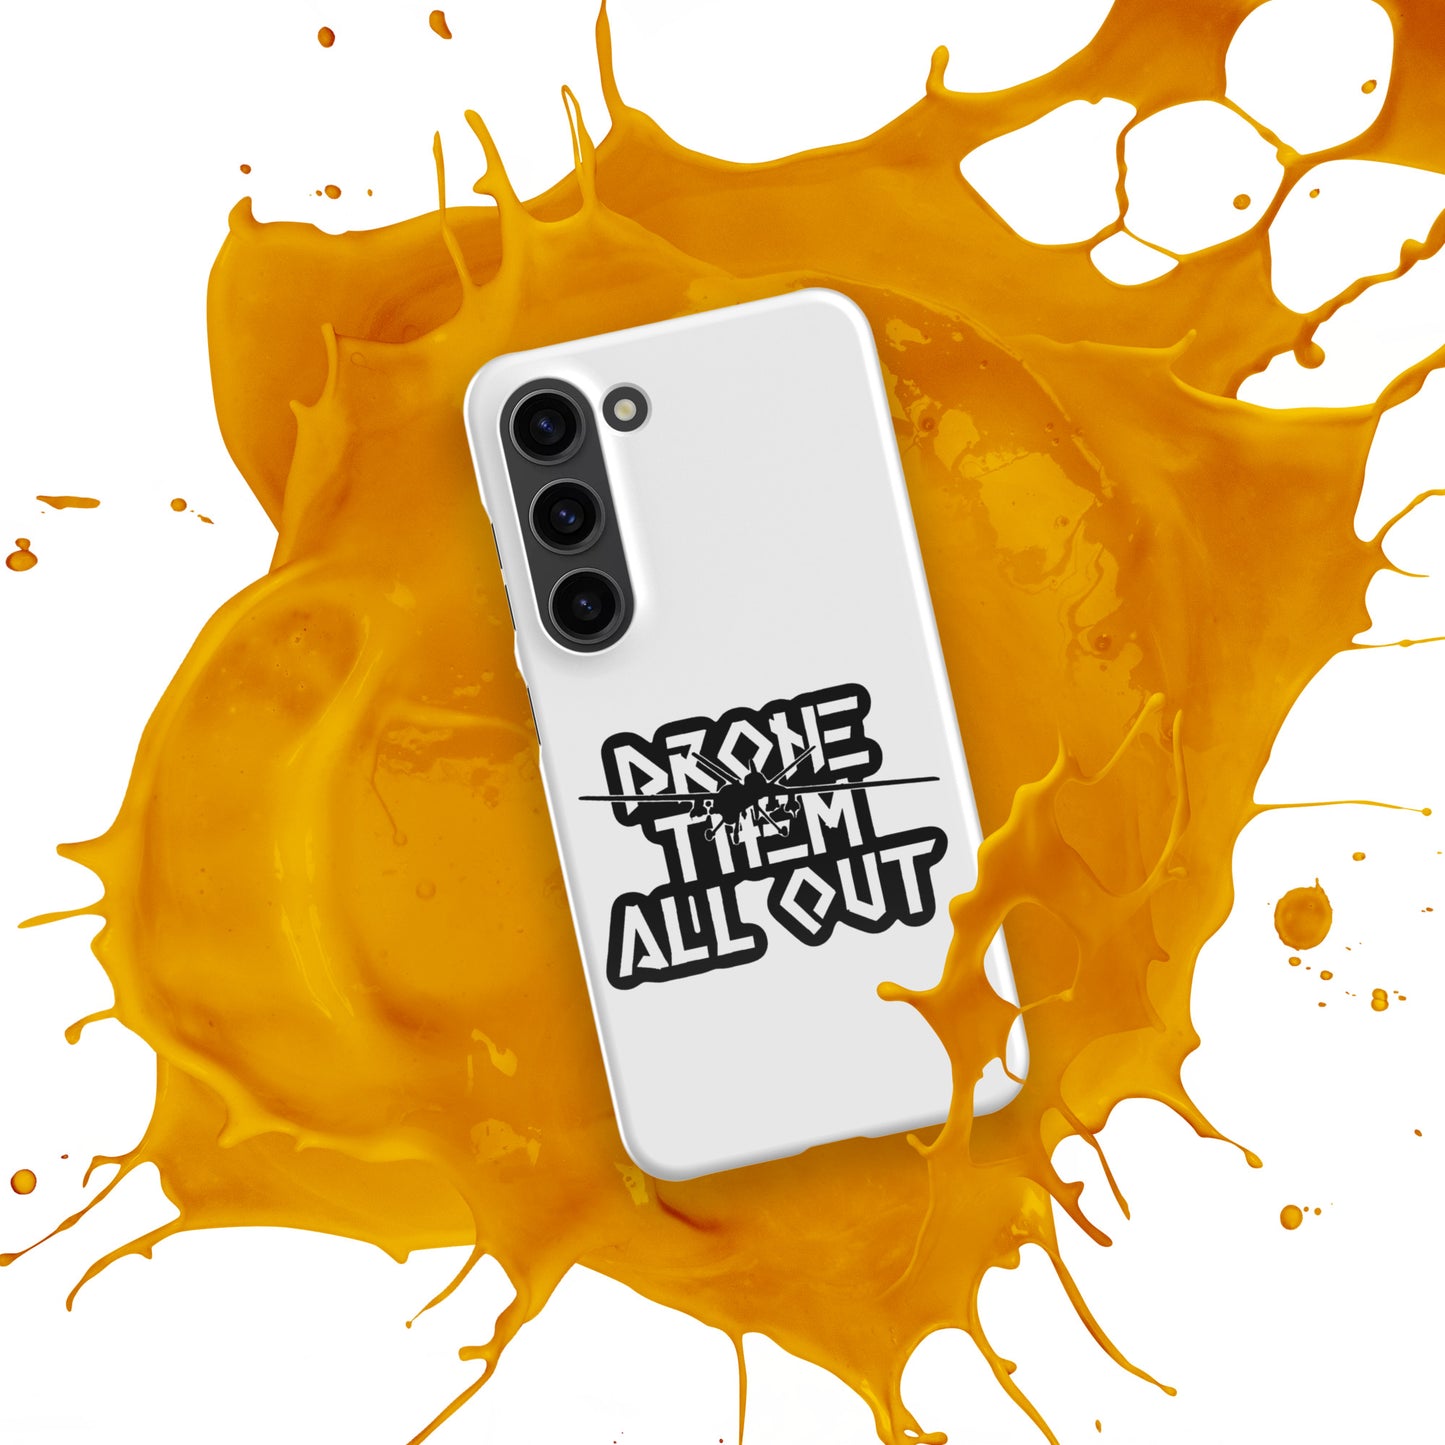 Drone Them Out- Reaper Snap case for Samsung®